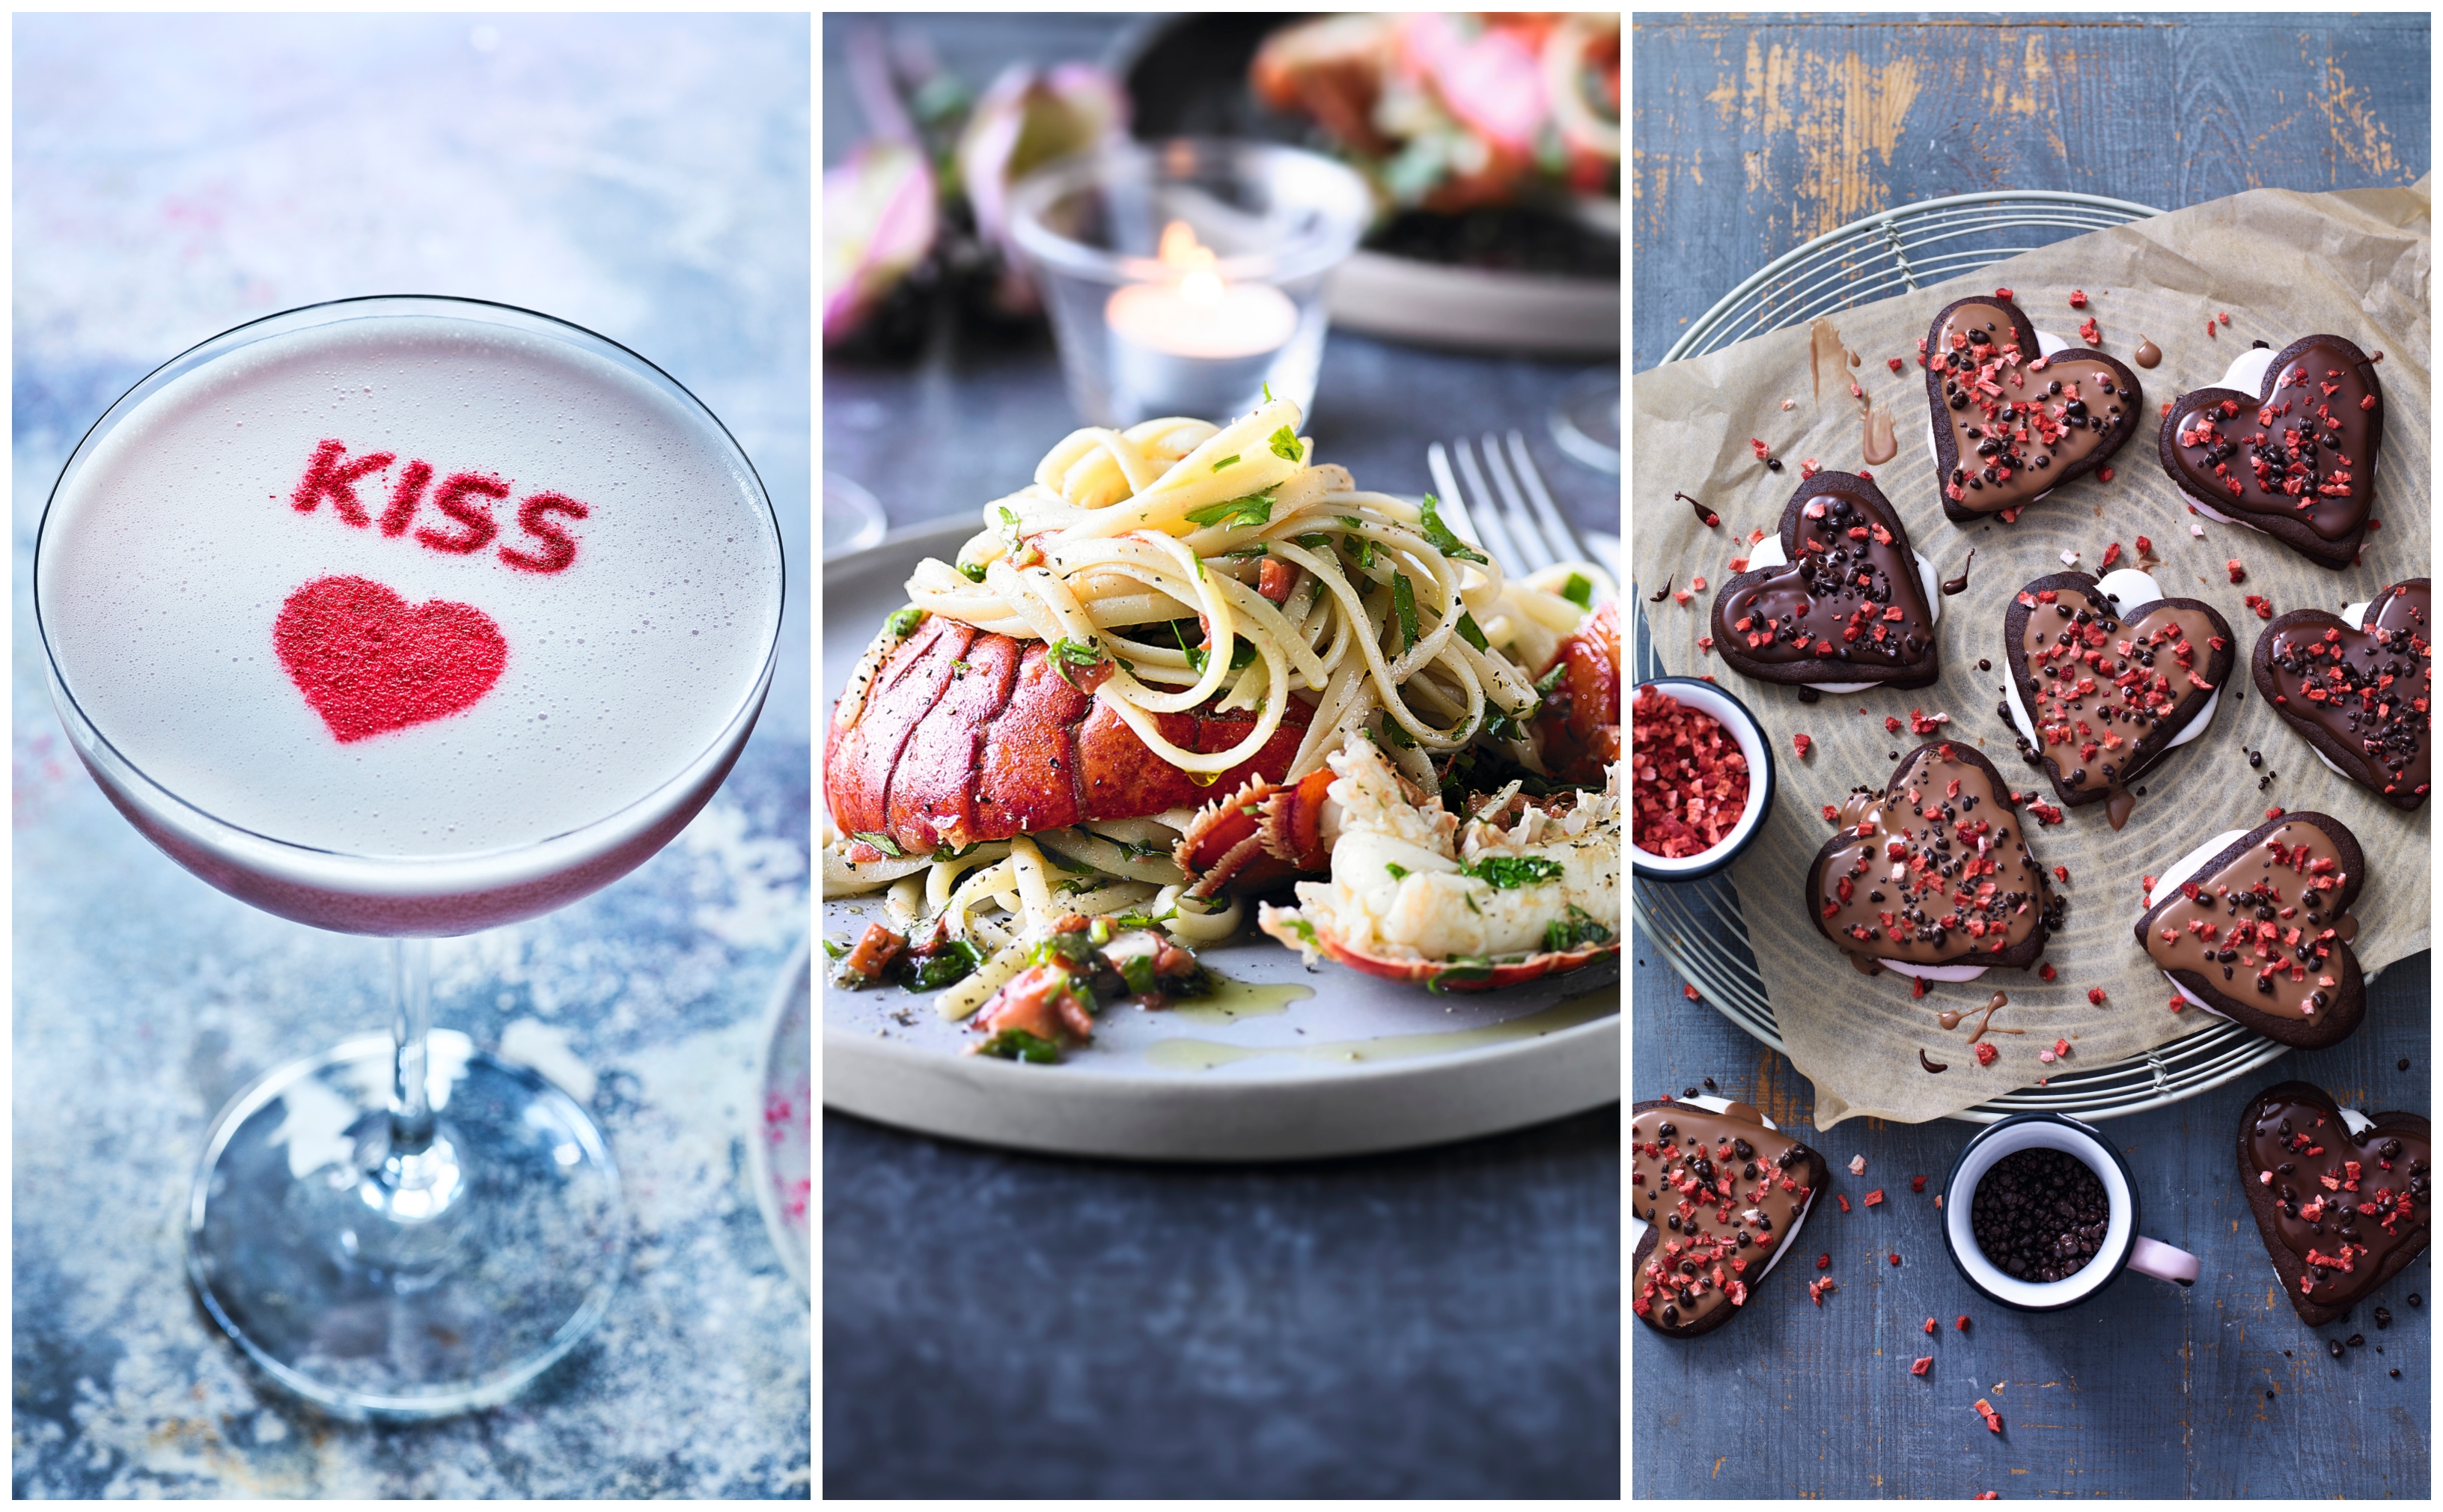 Show your love this Valentine's Day by cooking for your significant other (Pictures courtesy of Waitrose & Partners)